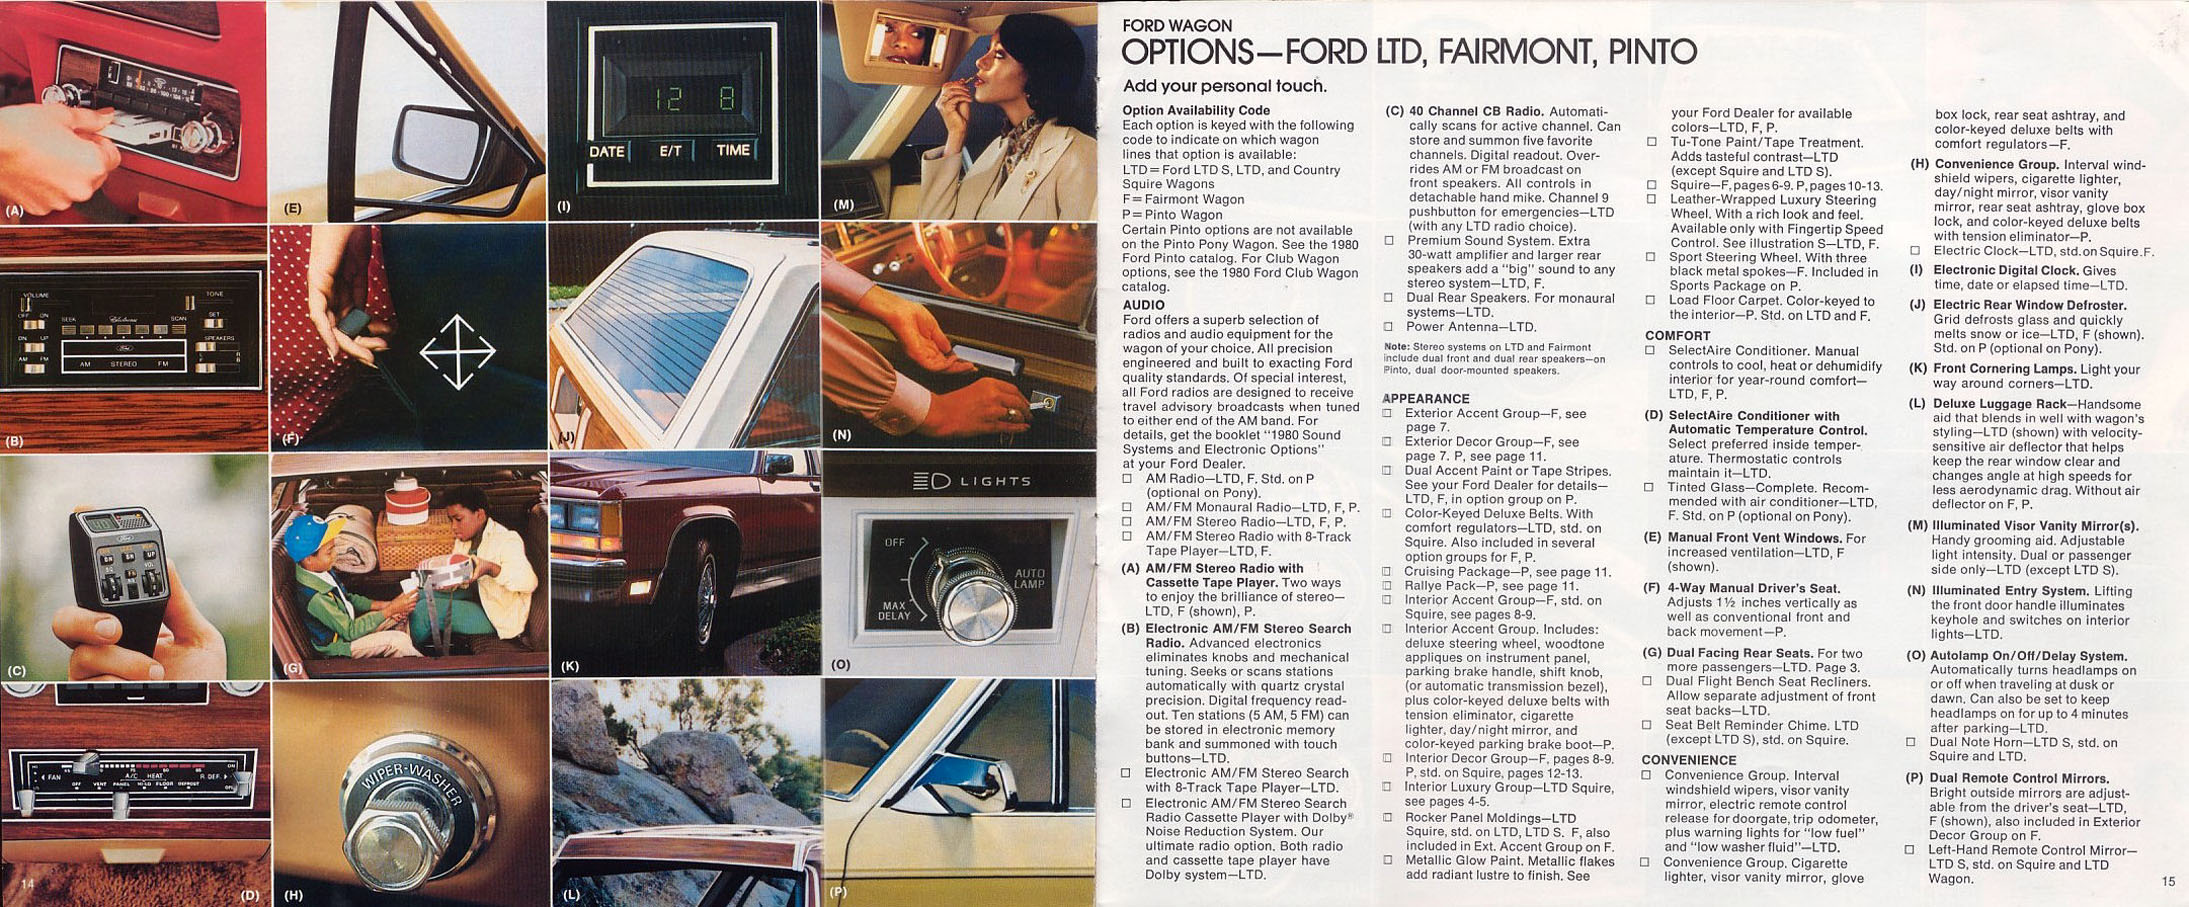 1980 Ford Wagons Brochure Page 3